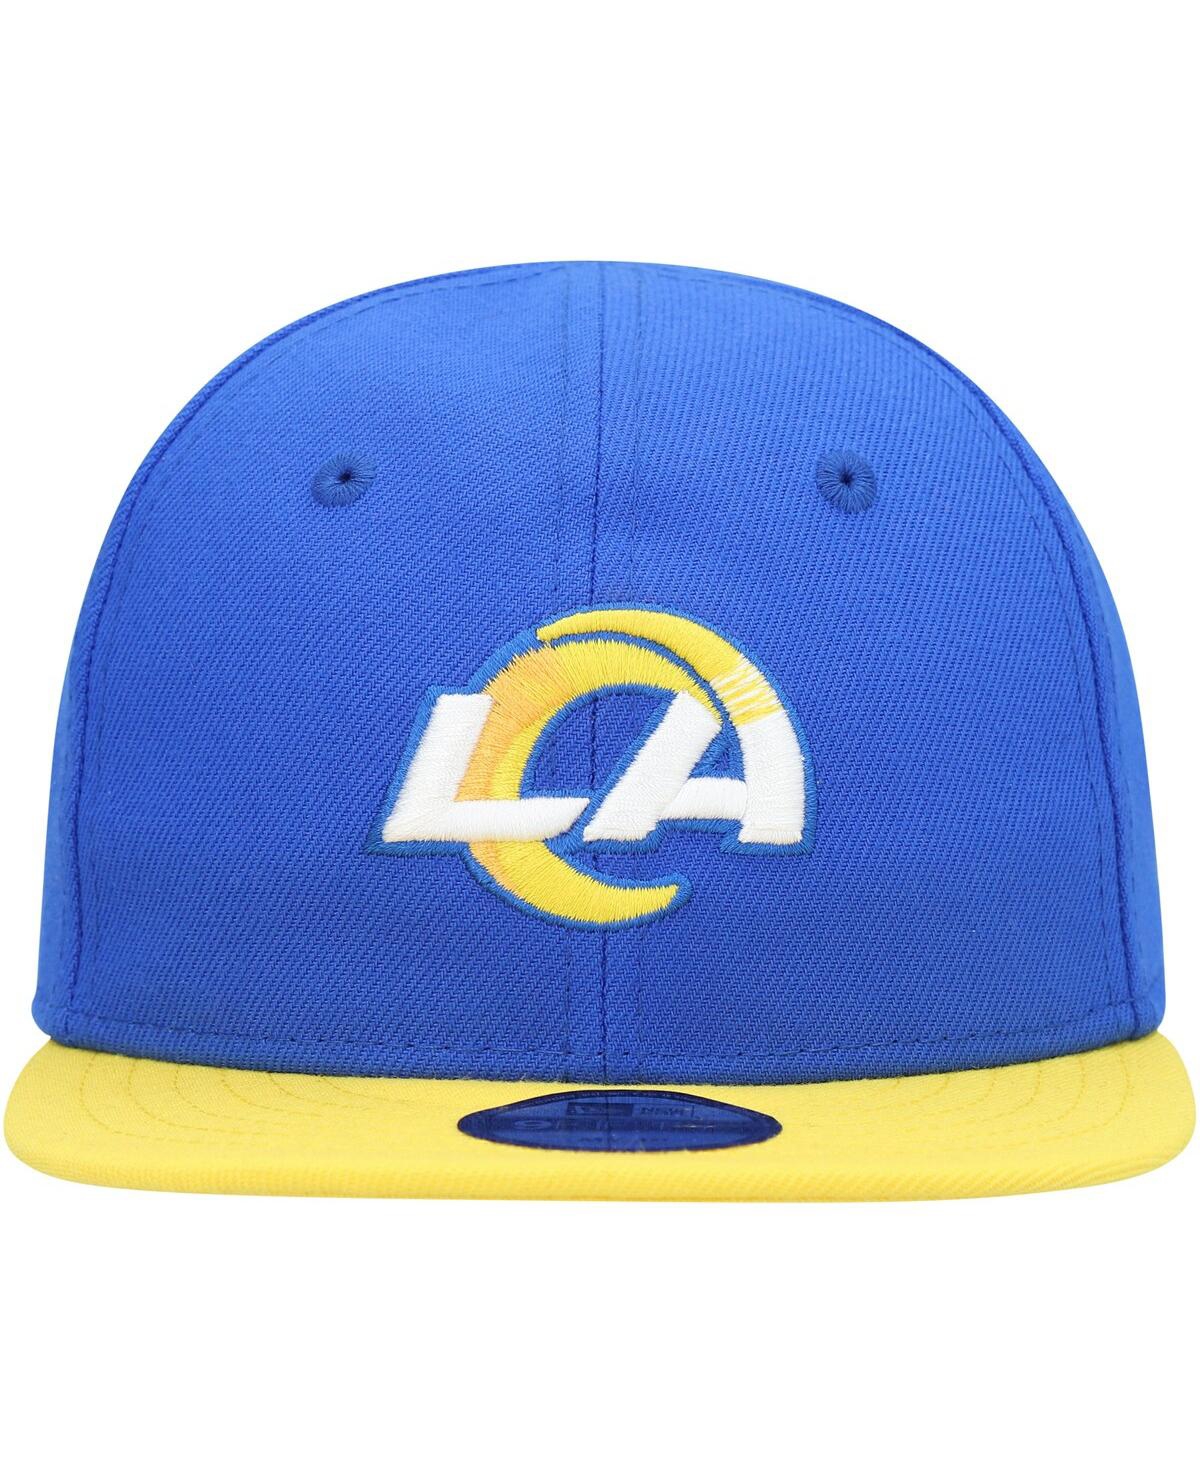 Shop New Era Boys And Girls Infant  Royal, Gold Los Angeles Rams My 1st 9fifty Adjustable Hat